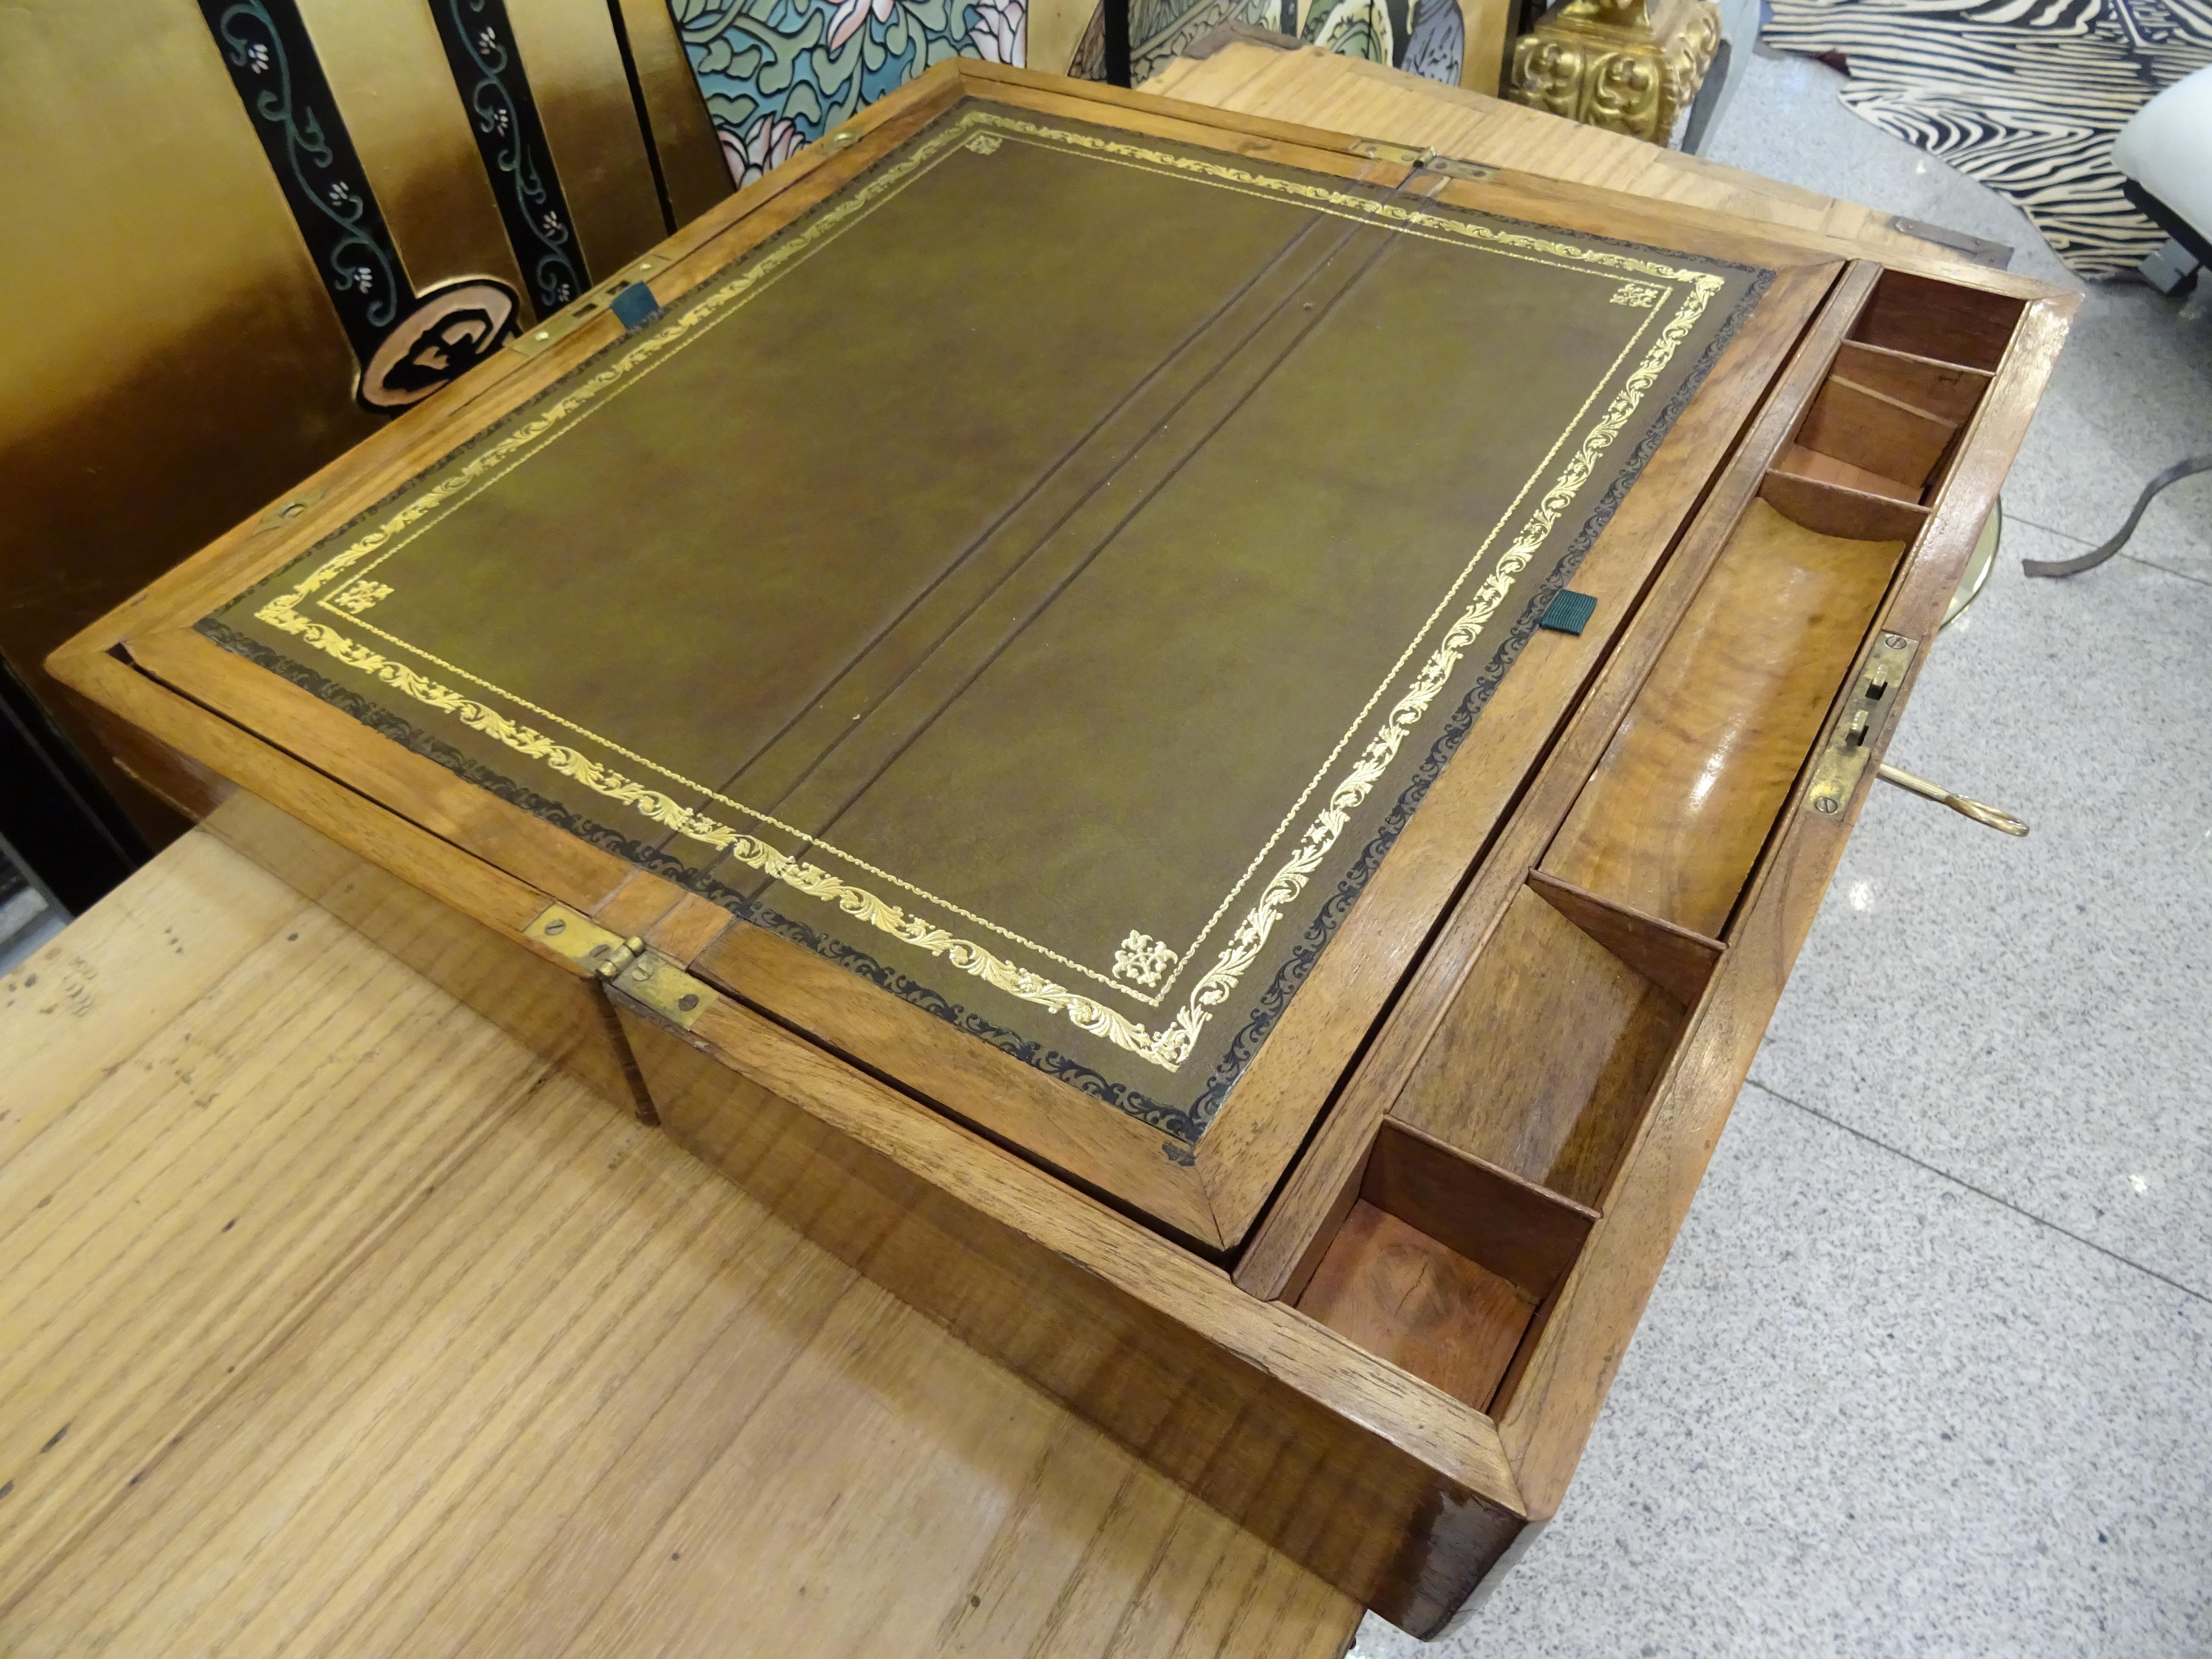 19th Century English Boat Desk-Box, Inlaid Wood and Mother of Pearl 1